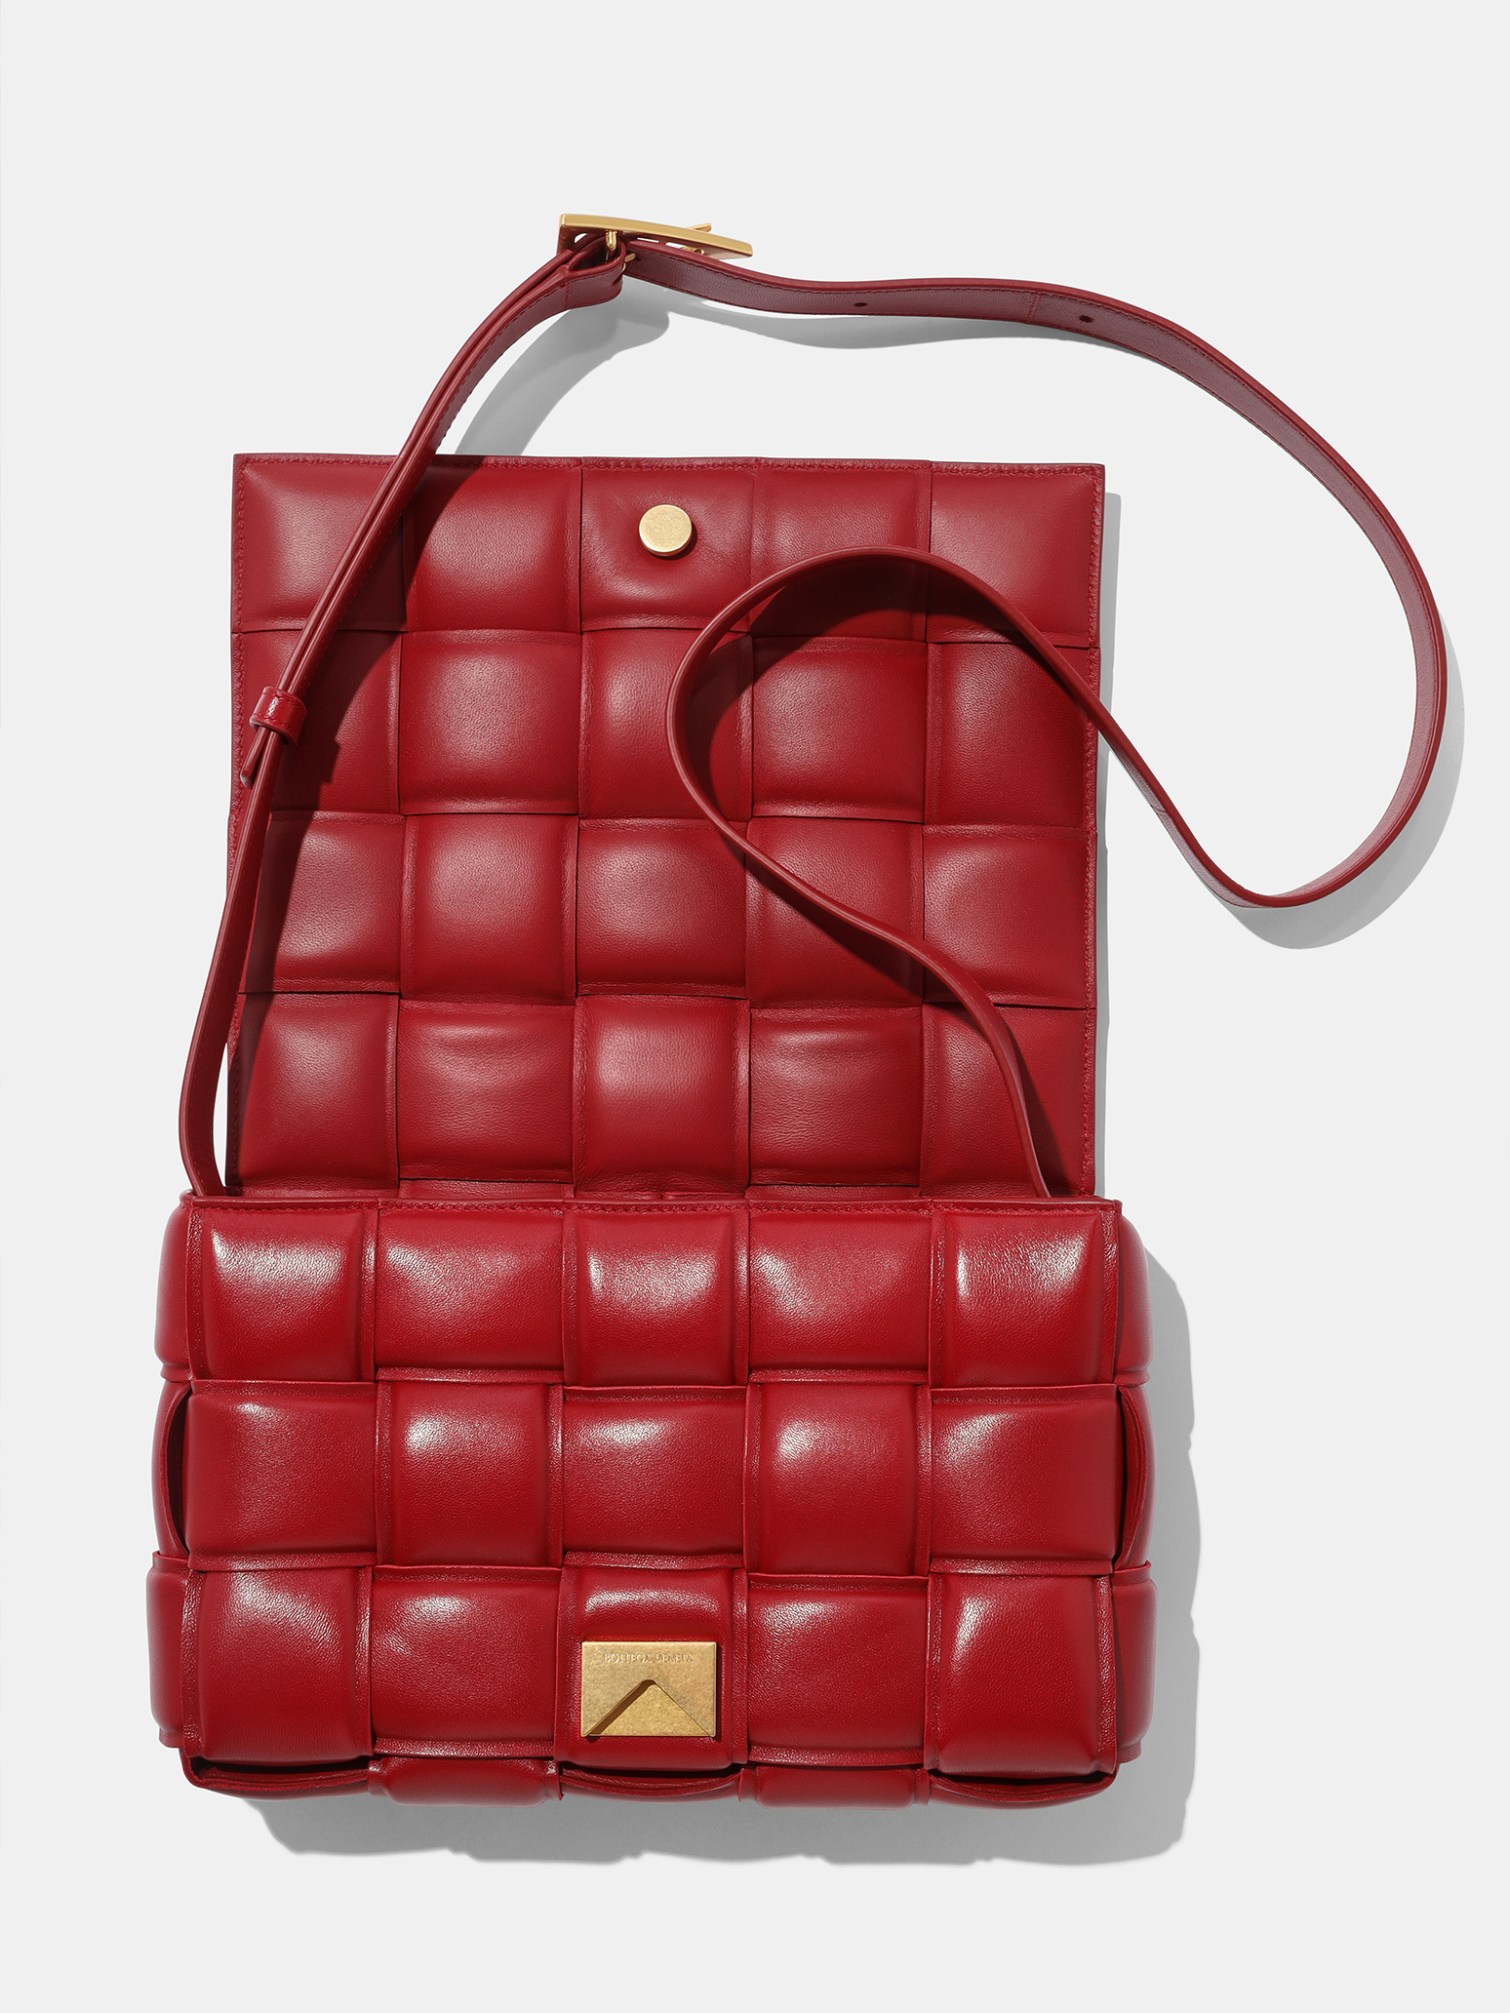 BOTTEGA VENETA BAGS IN 2021 - WILL THEY BE CLASSICS?, The Pouch, Jodie,  Cassette